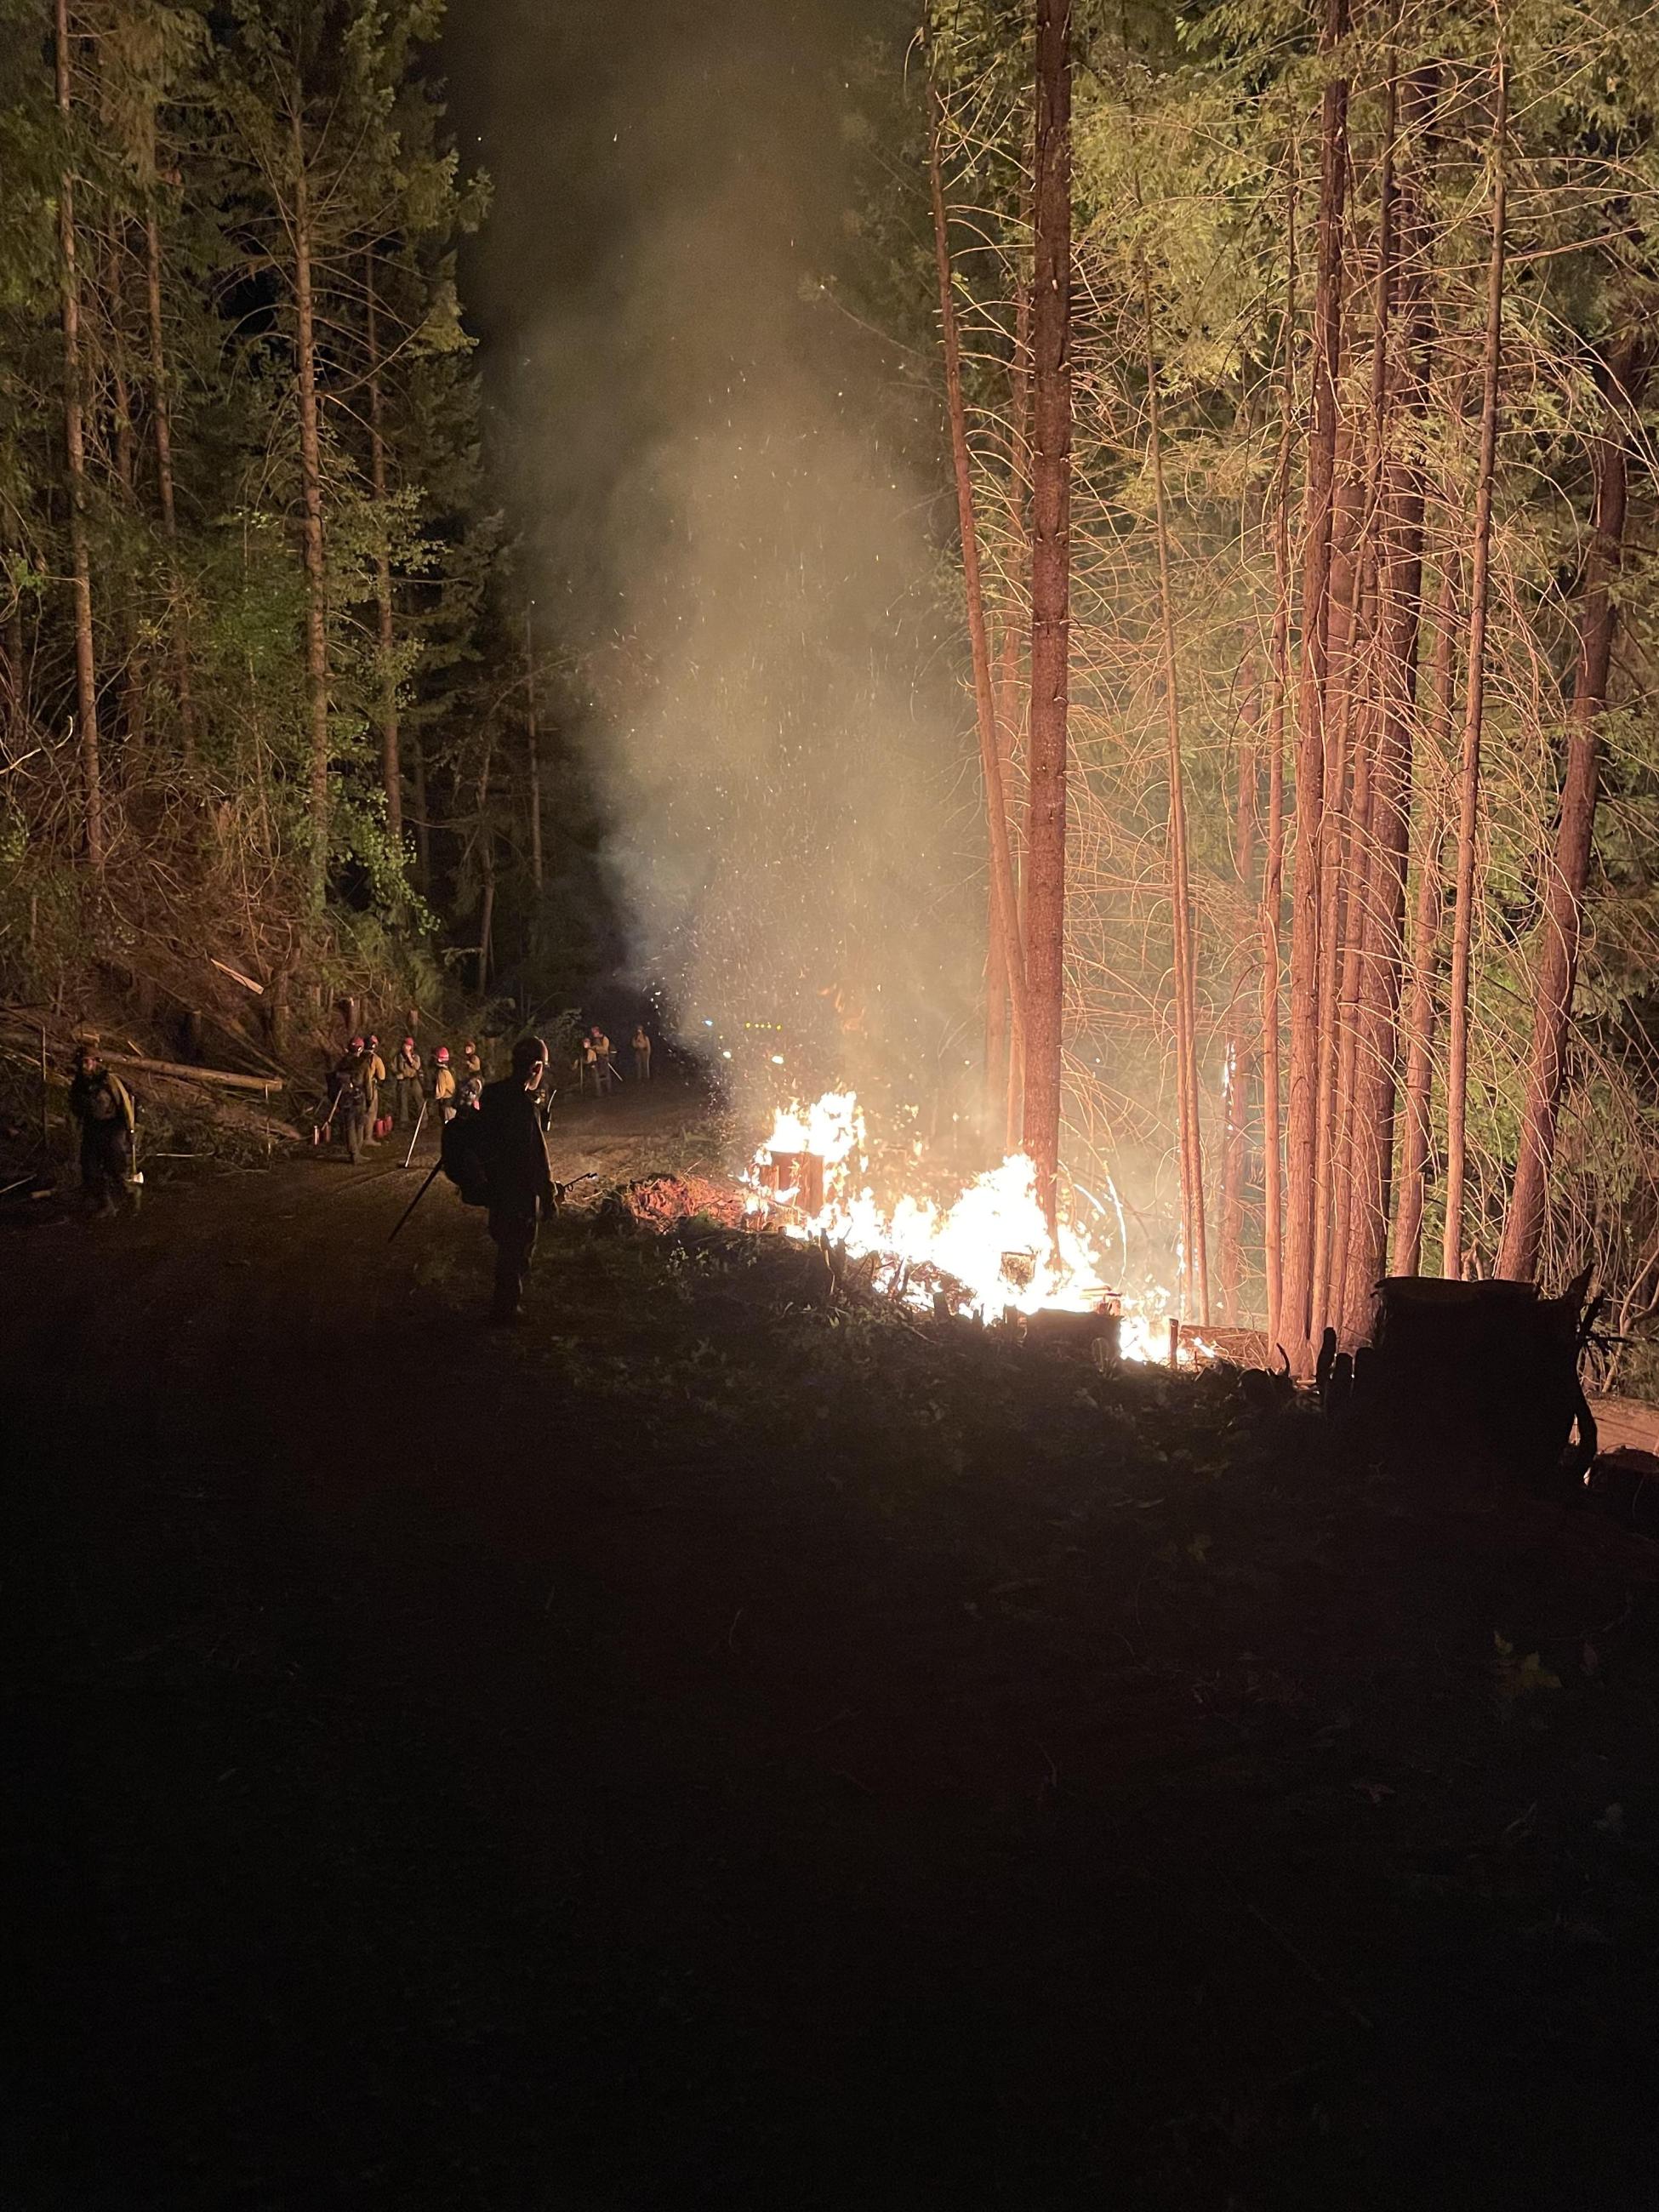 The fire is staffed around the clock including an active night shift that has been making good progress during lower temperatures and higher humidity.